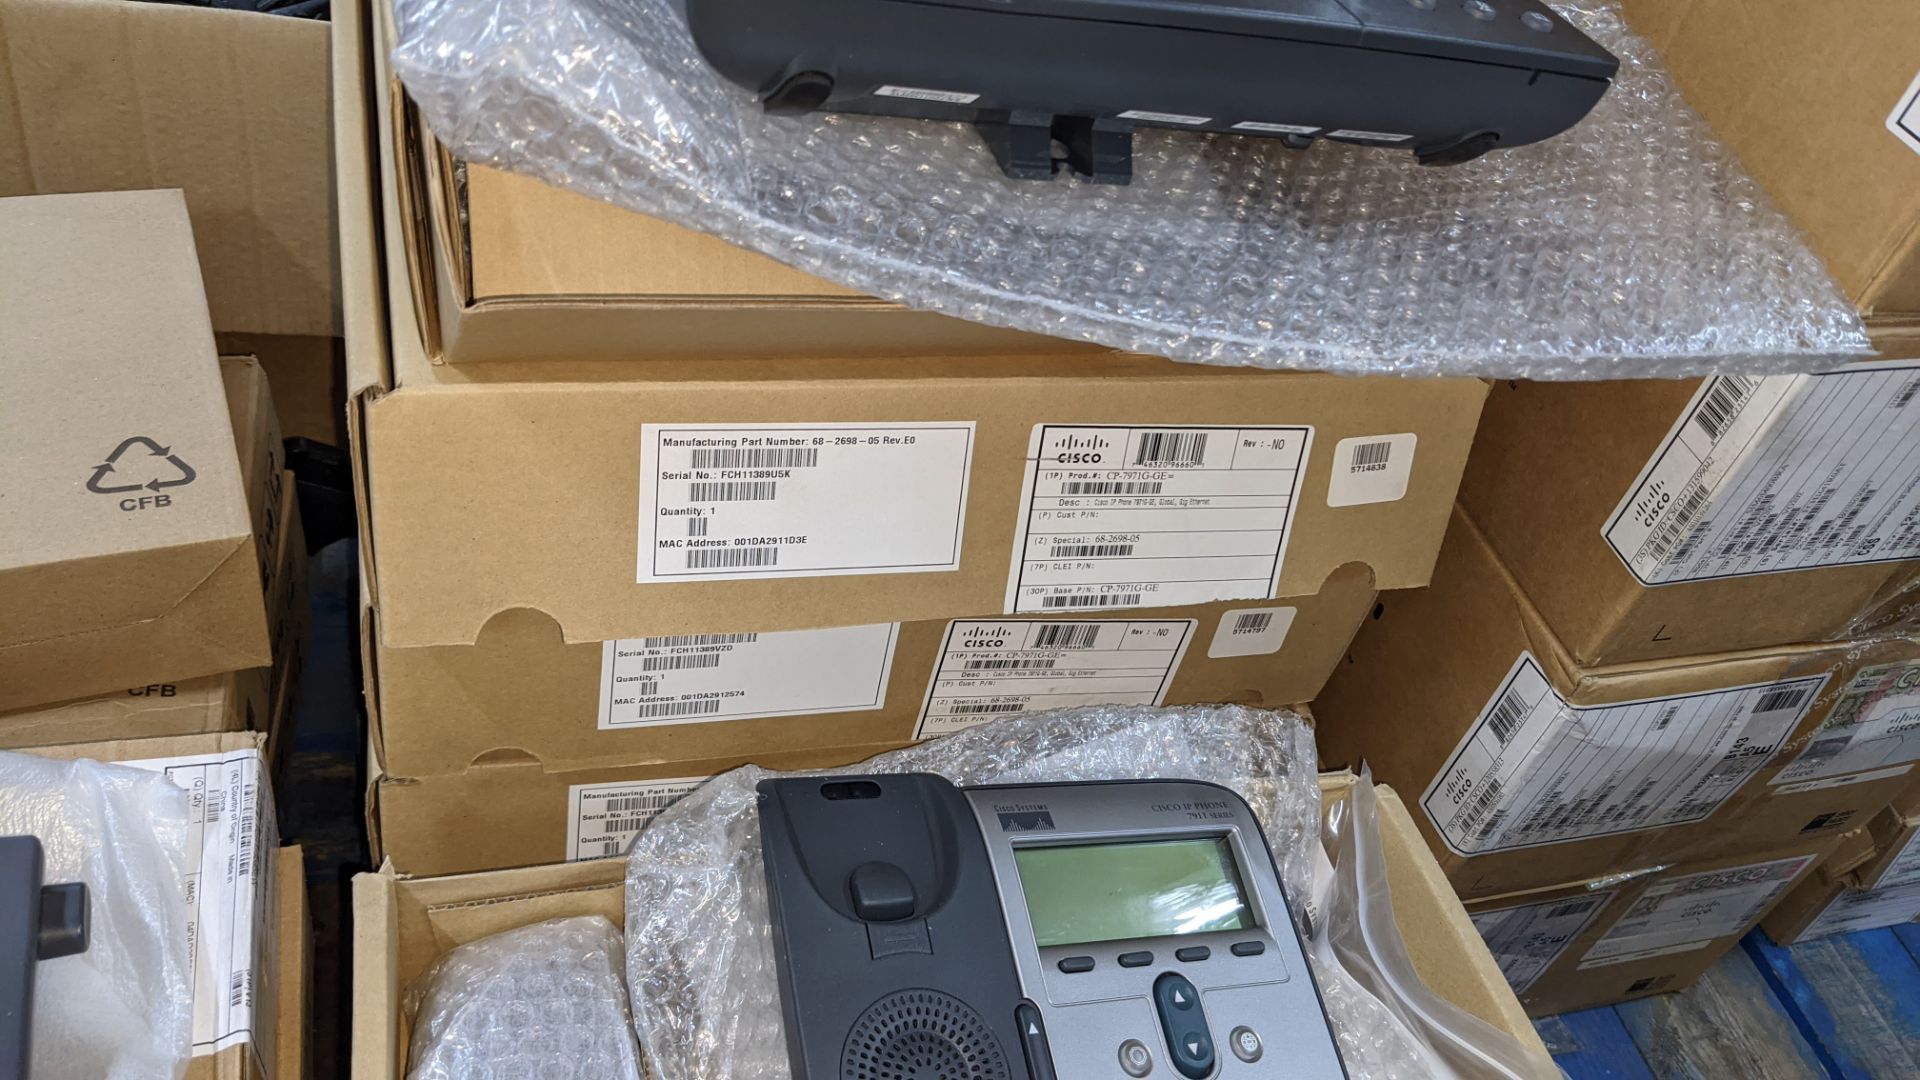 13 off Cisco handsets, model 7940, 7911 & 7971. Appear to be new & unused in Cisco branded boxes - Image 5 of 6